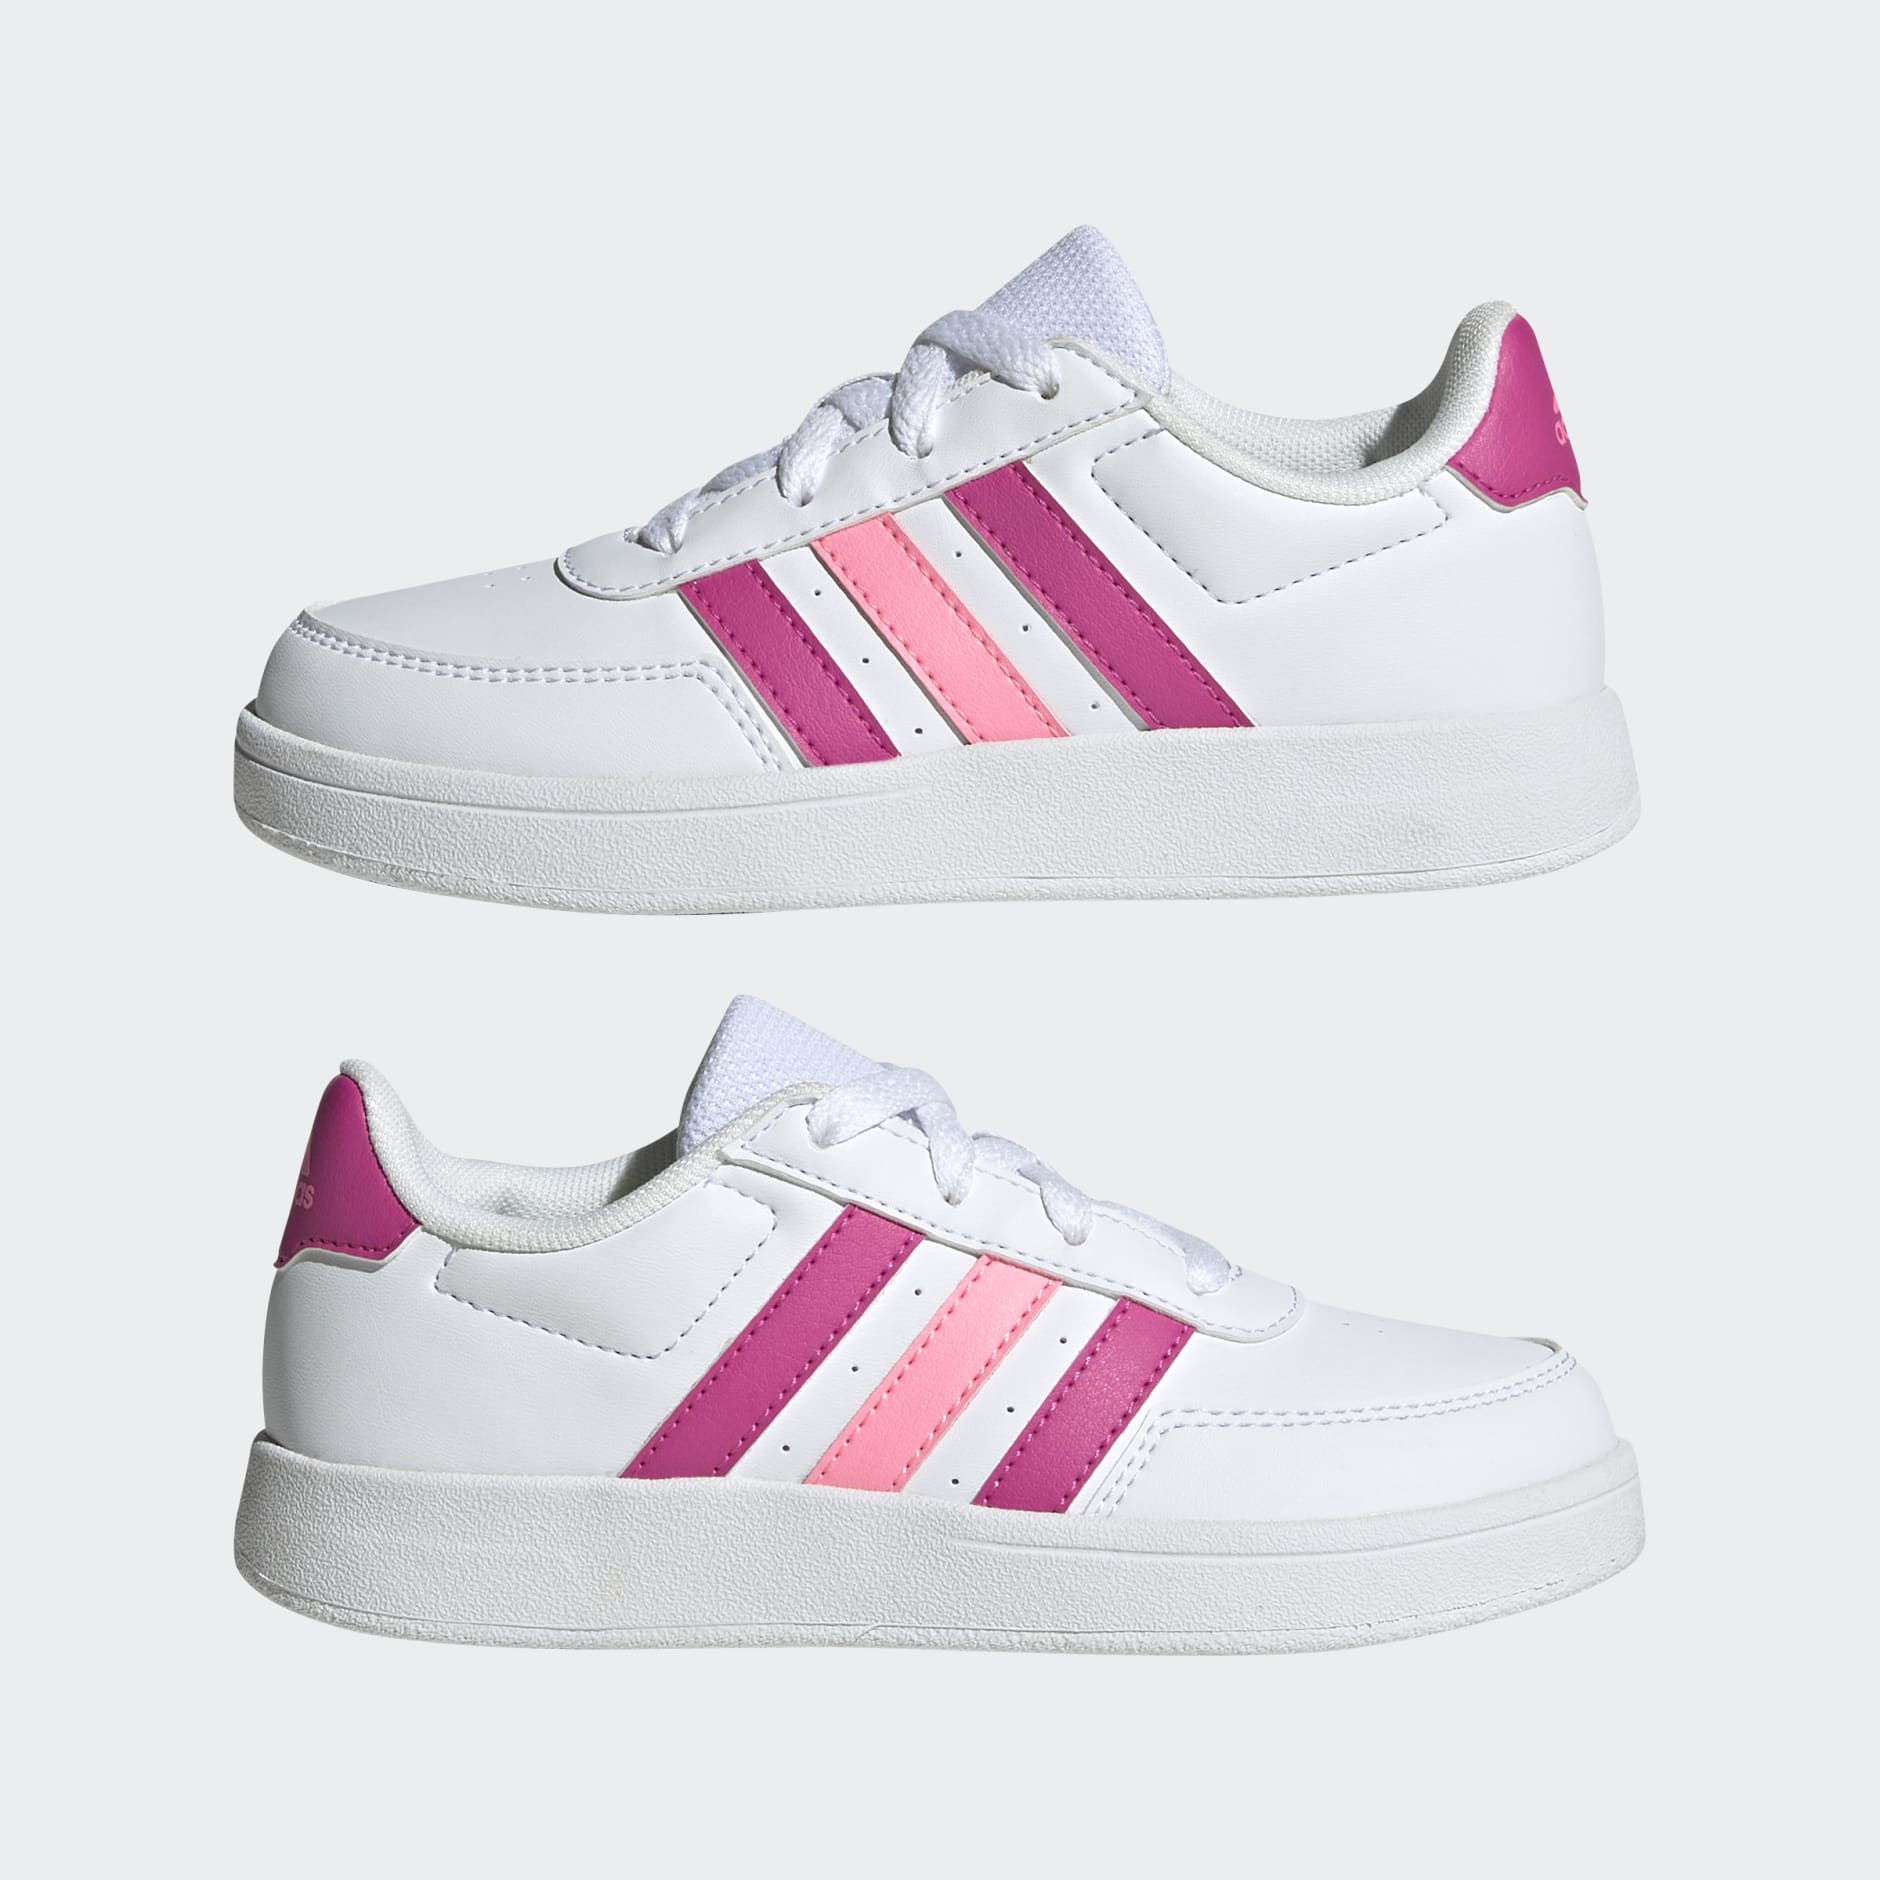 Adidas, Reebok, and More On-Sale Spring Sneakers Are in My Amazon Cart